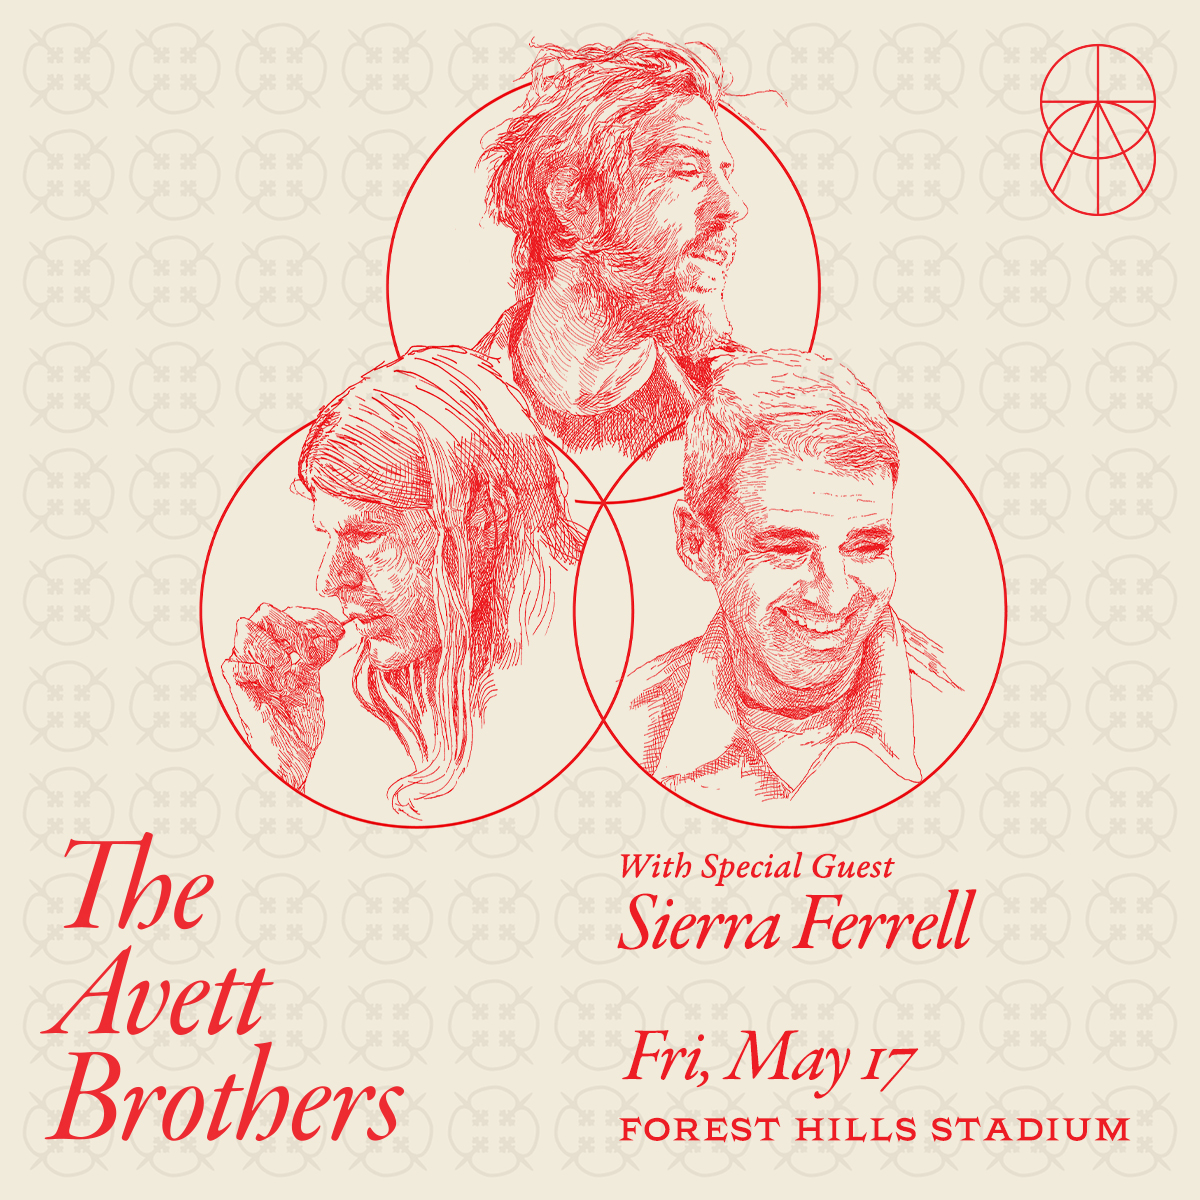 Enter now at wehm.com and click on the “Free Stuff” tab for your chance at a pair of tickets to @theavettbros at Forest Hills Stadium on Friday, May 17th. Don’t want to wait? Tickets are on-sale at axs.com! 📻

#theavettbrothers #foresthills